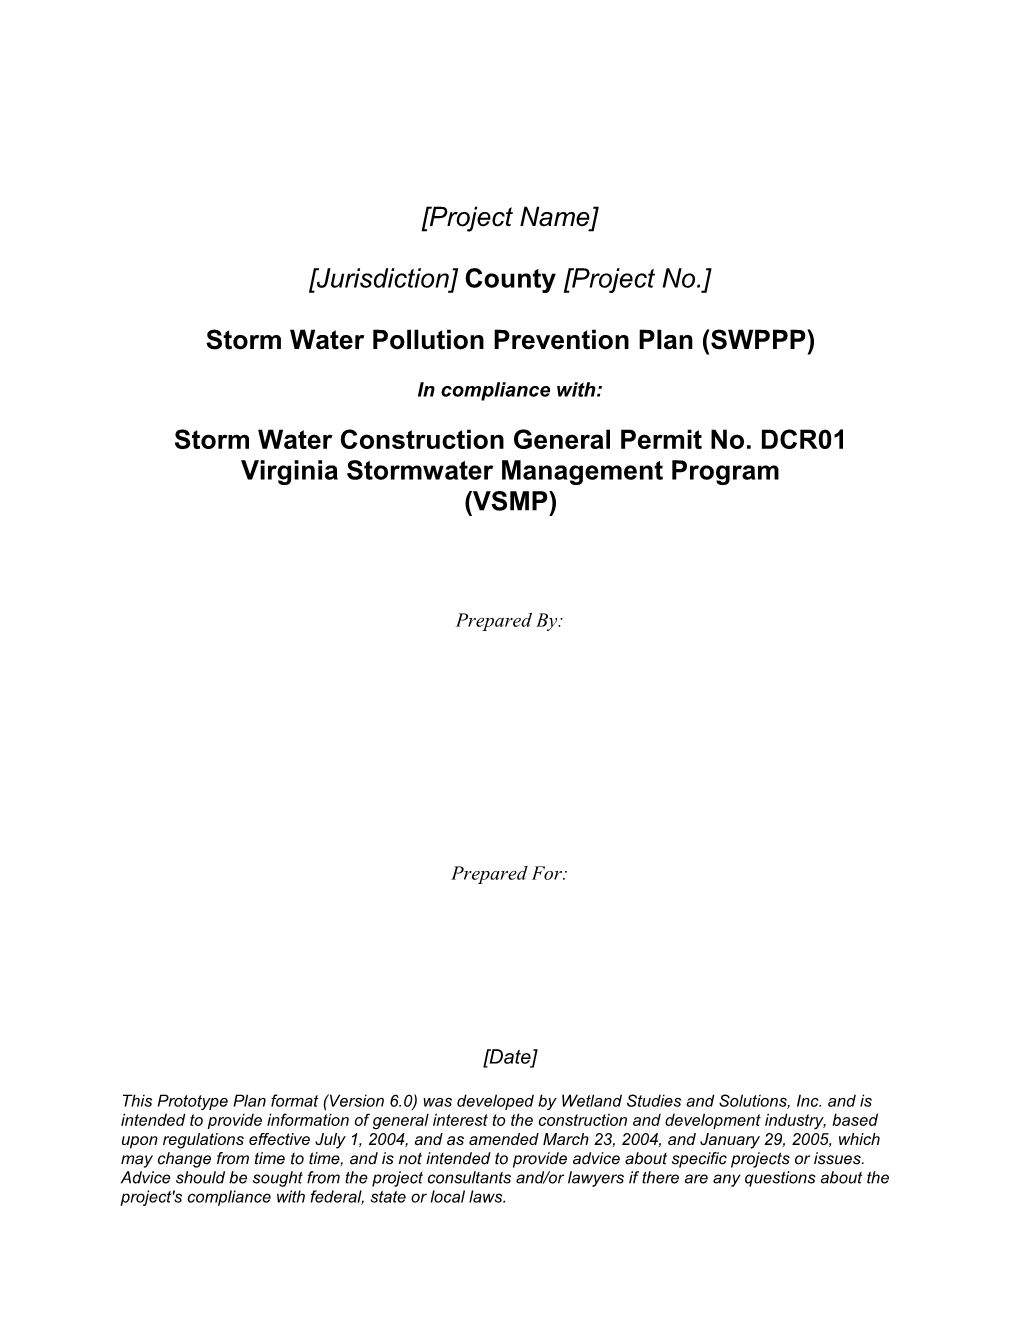 Storm Water Pollution Prevention Plan (SWPPP)